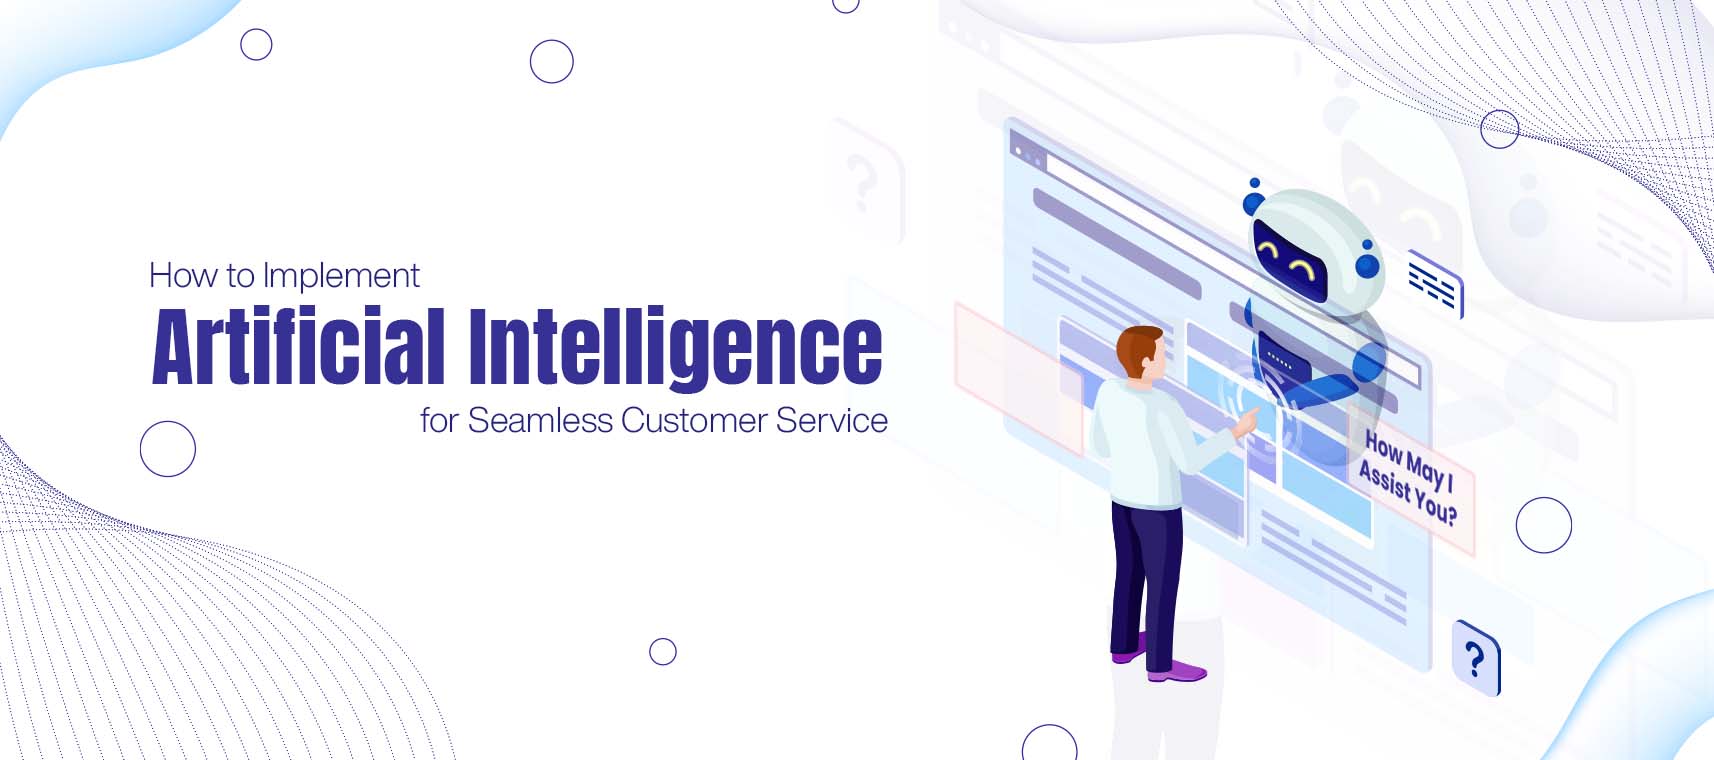 How to Implement Artificial Intelligence for Seamless Customer Service